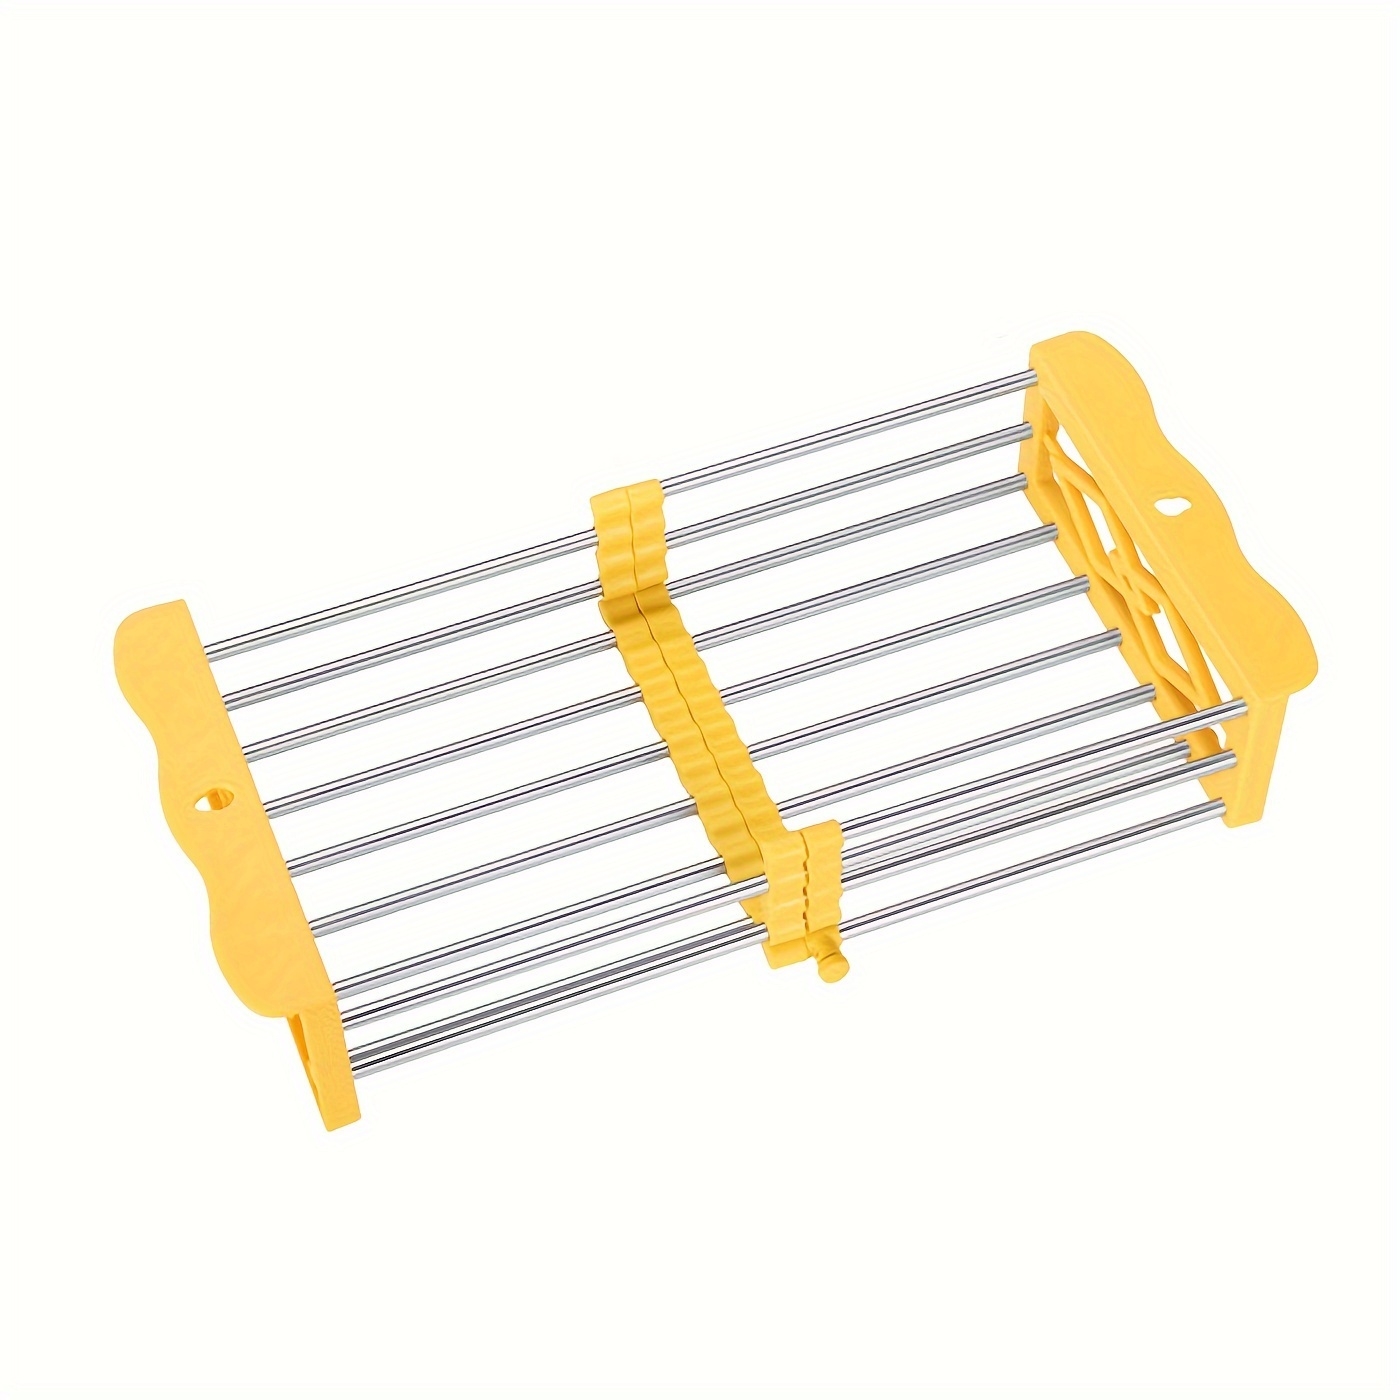 1pc Drain Rack, Stainless Steel Kitchen Basket, Home Dish Rack, Retractable Sink  Shelf, Suitable For Rectangular Sink